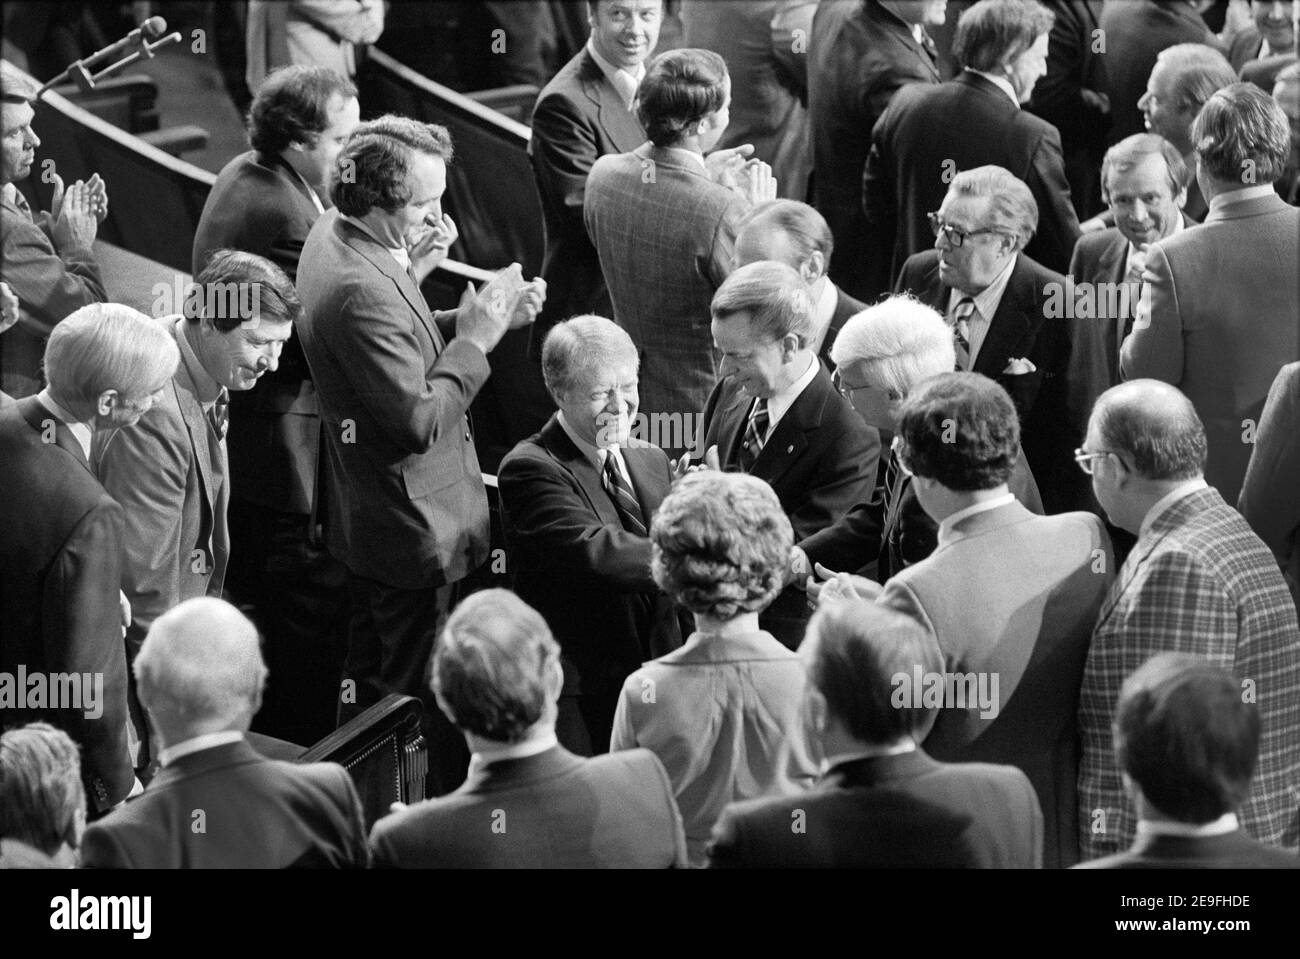 U.S. President Jimmy Carter during delivery of State of the Union Address to Joint Session of Congress, Washington, D.C., USA, Warren K. Leffler, January 22, 1979 Stock Photo